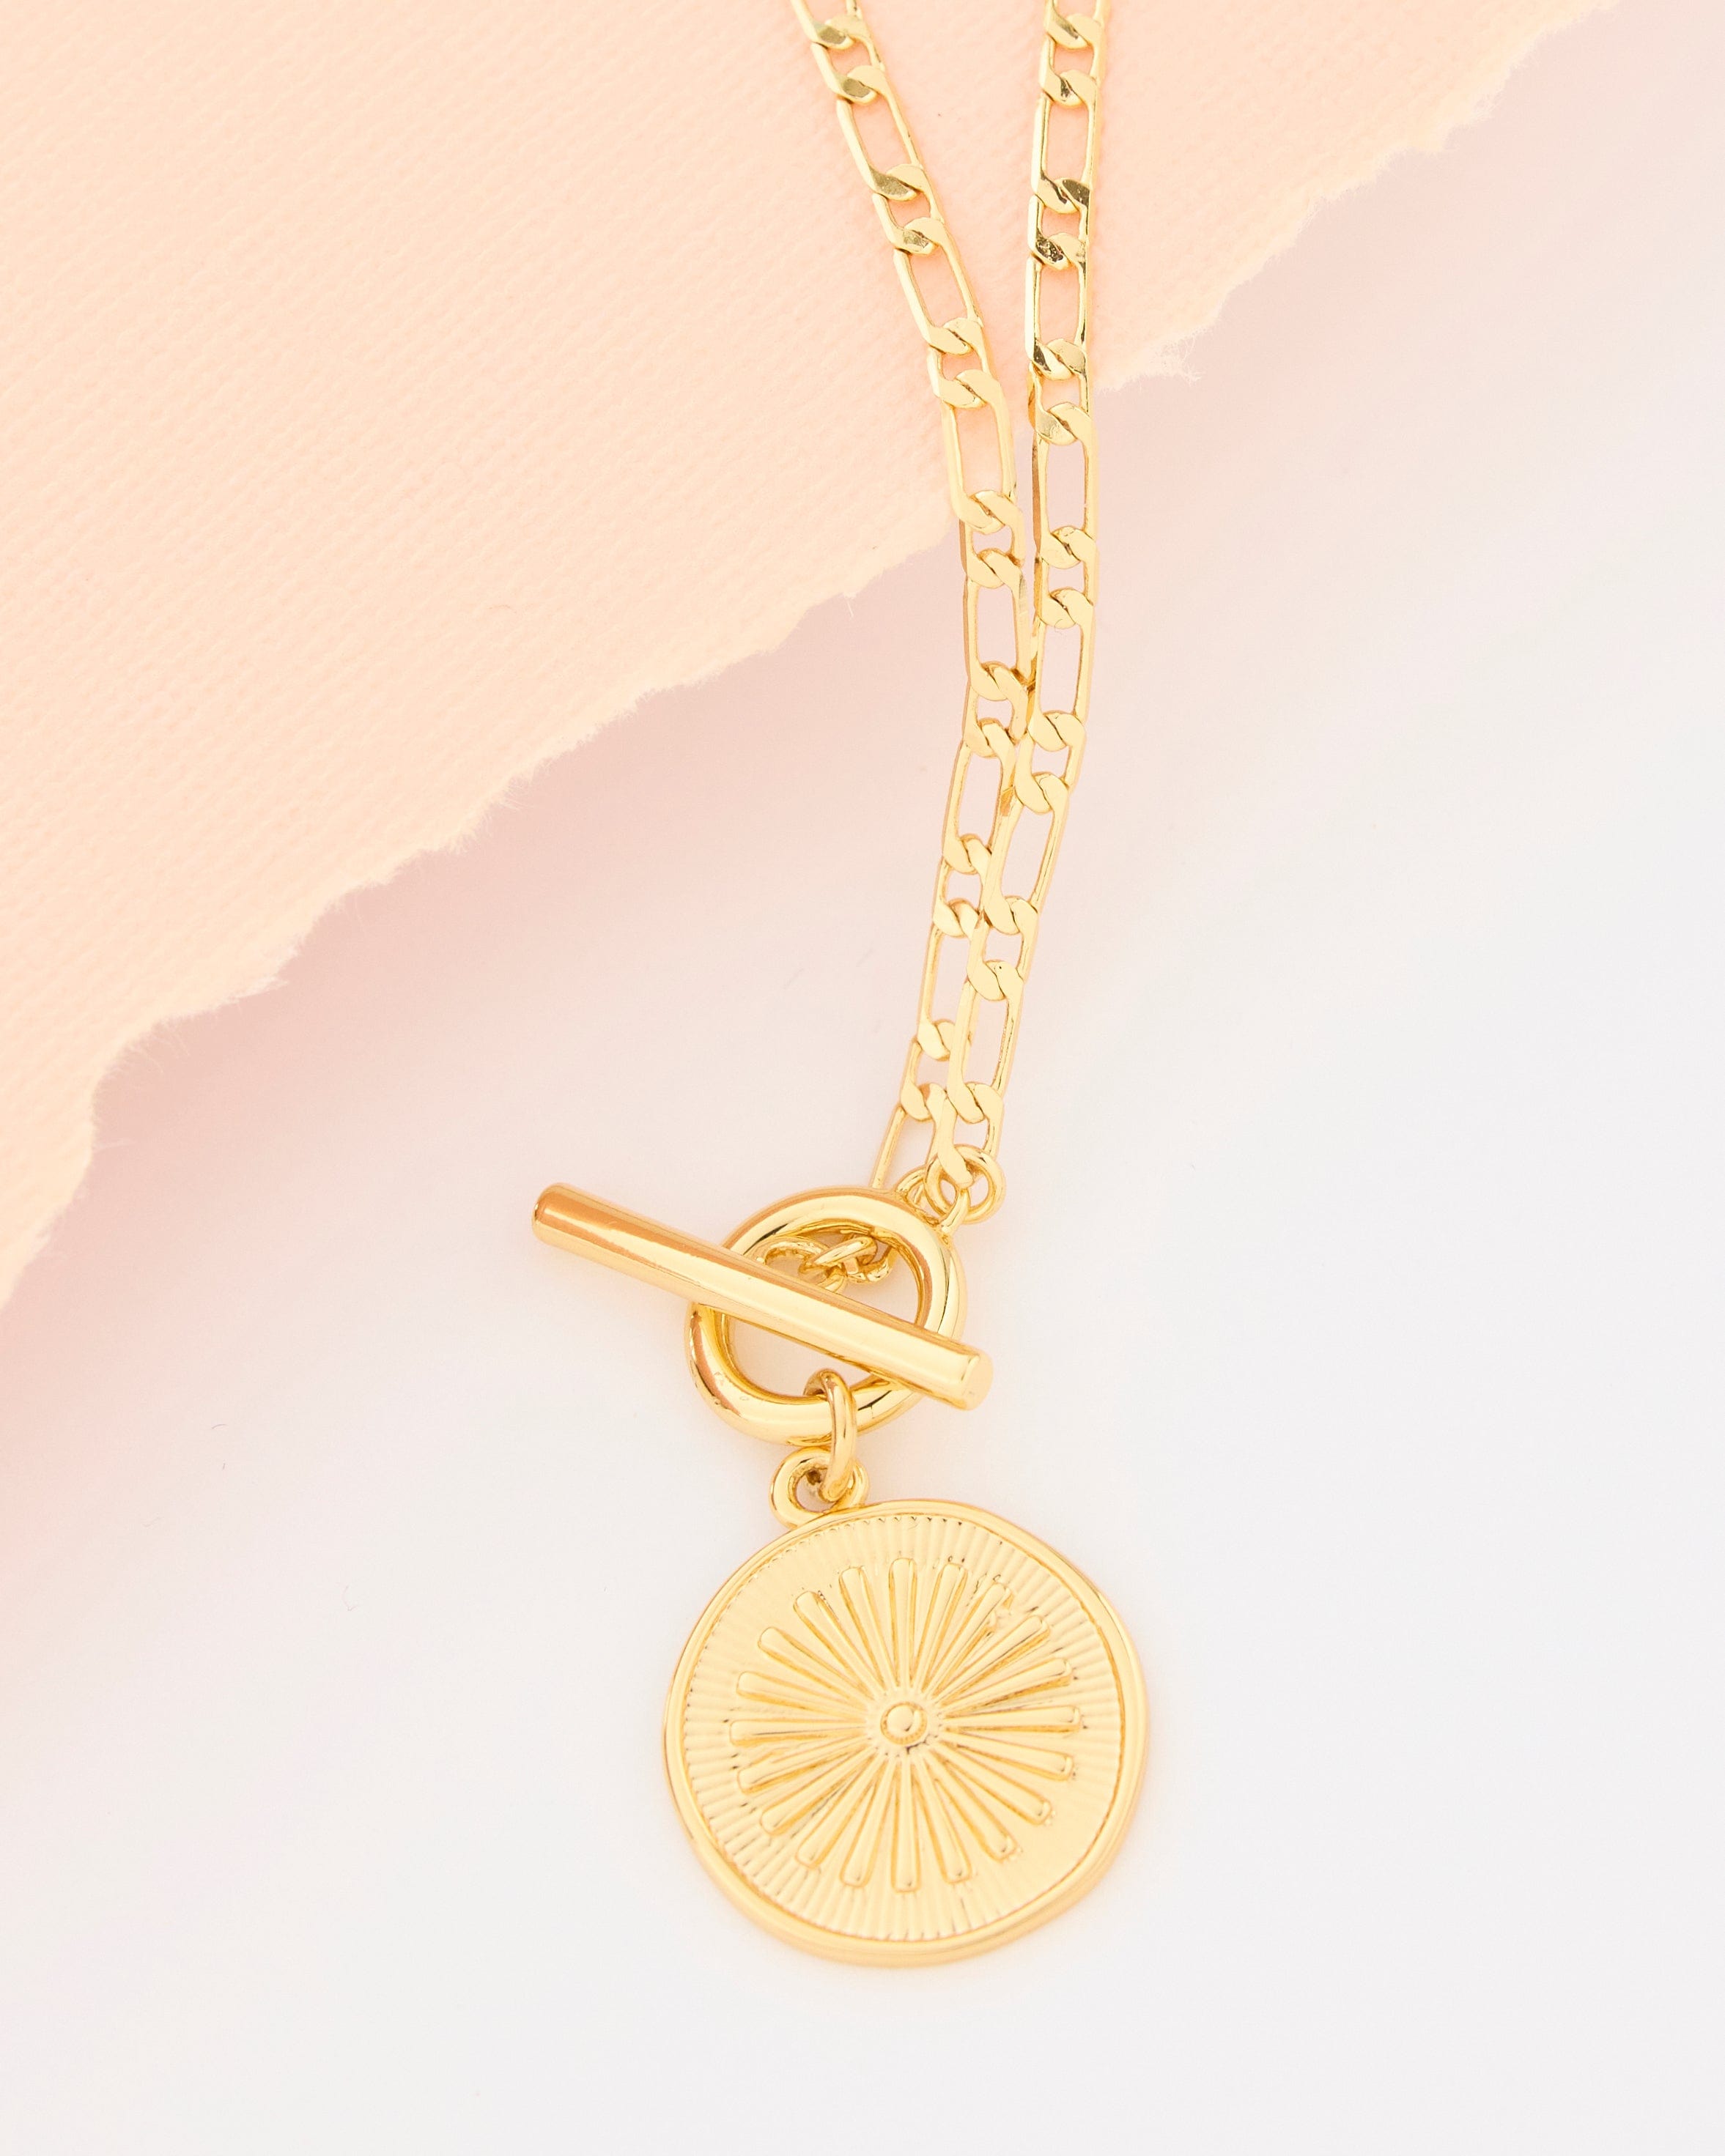 Gold necklace with flower charm.